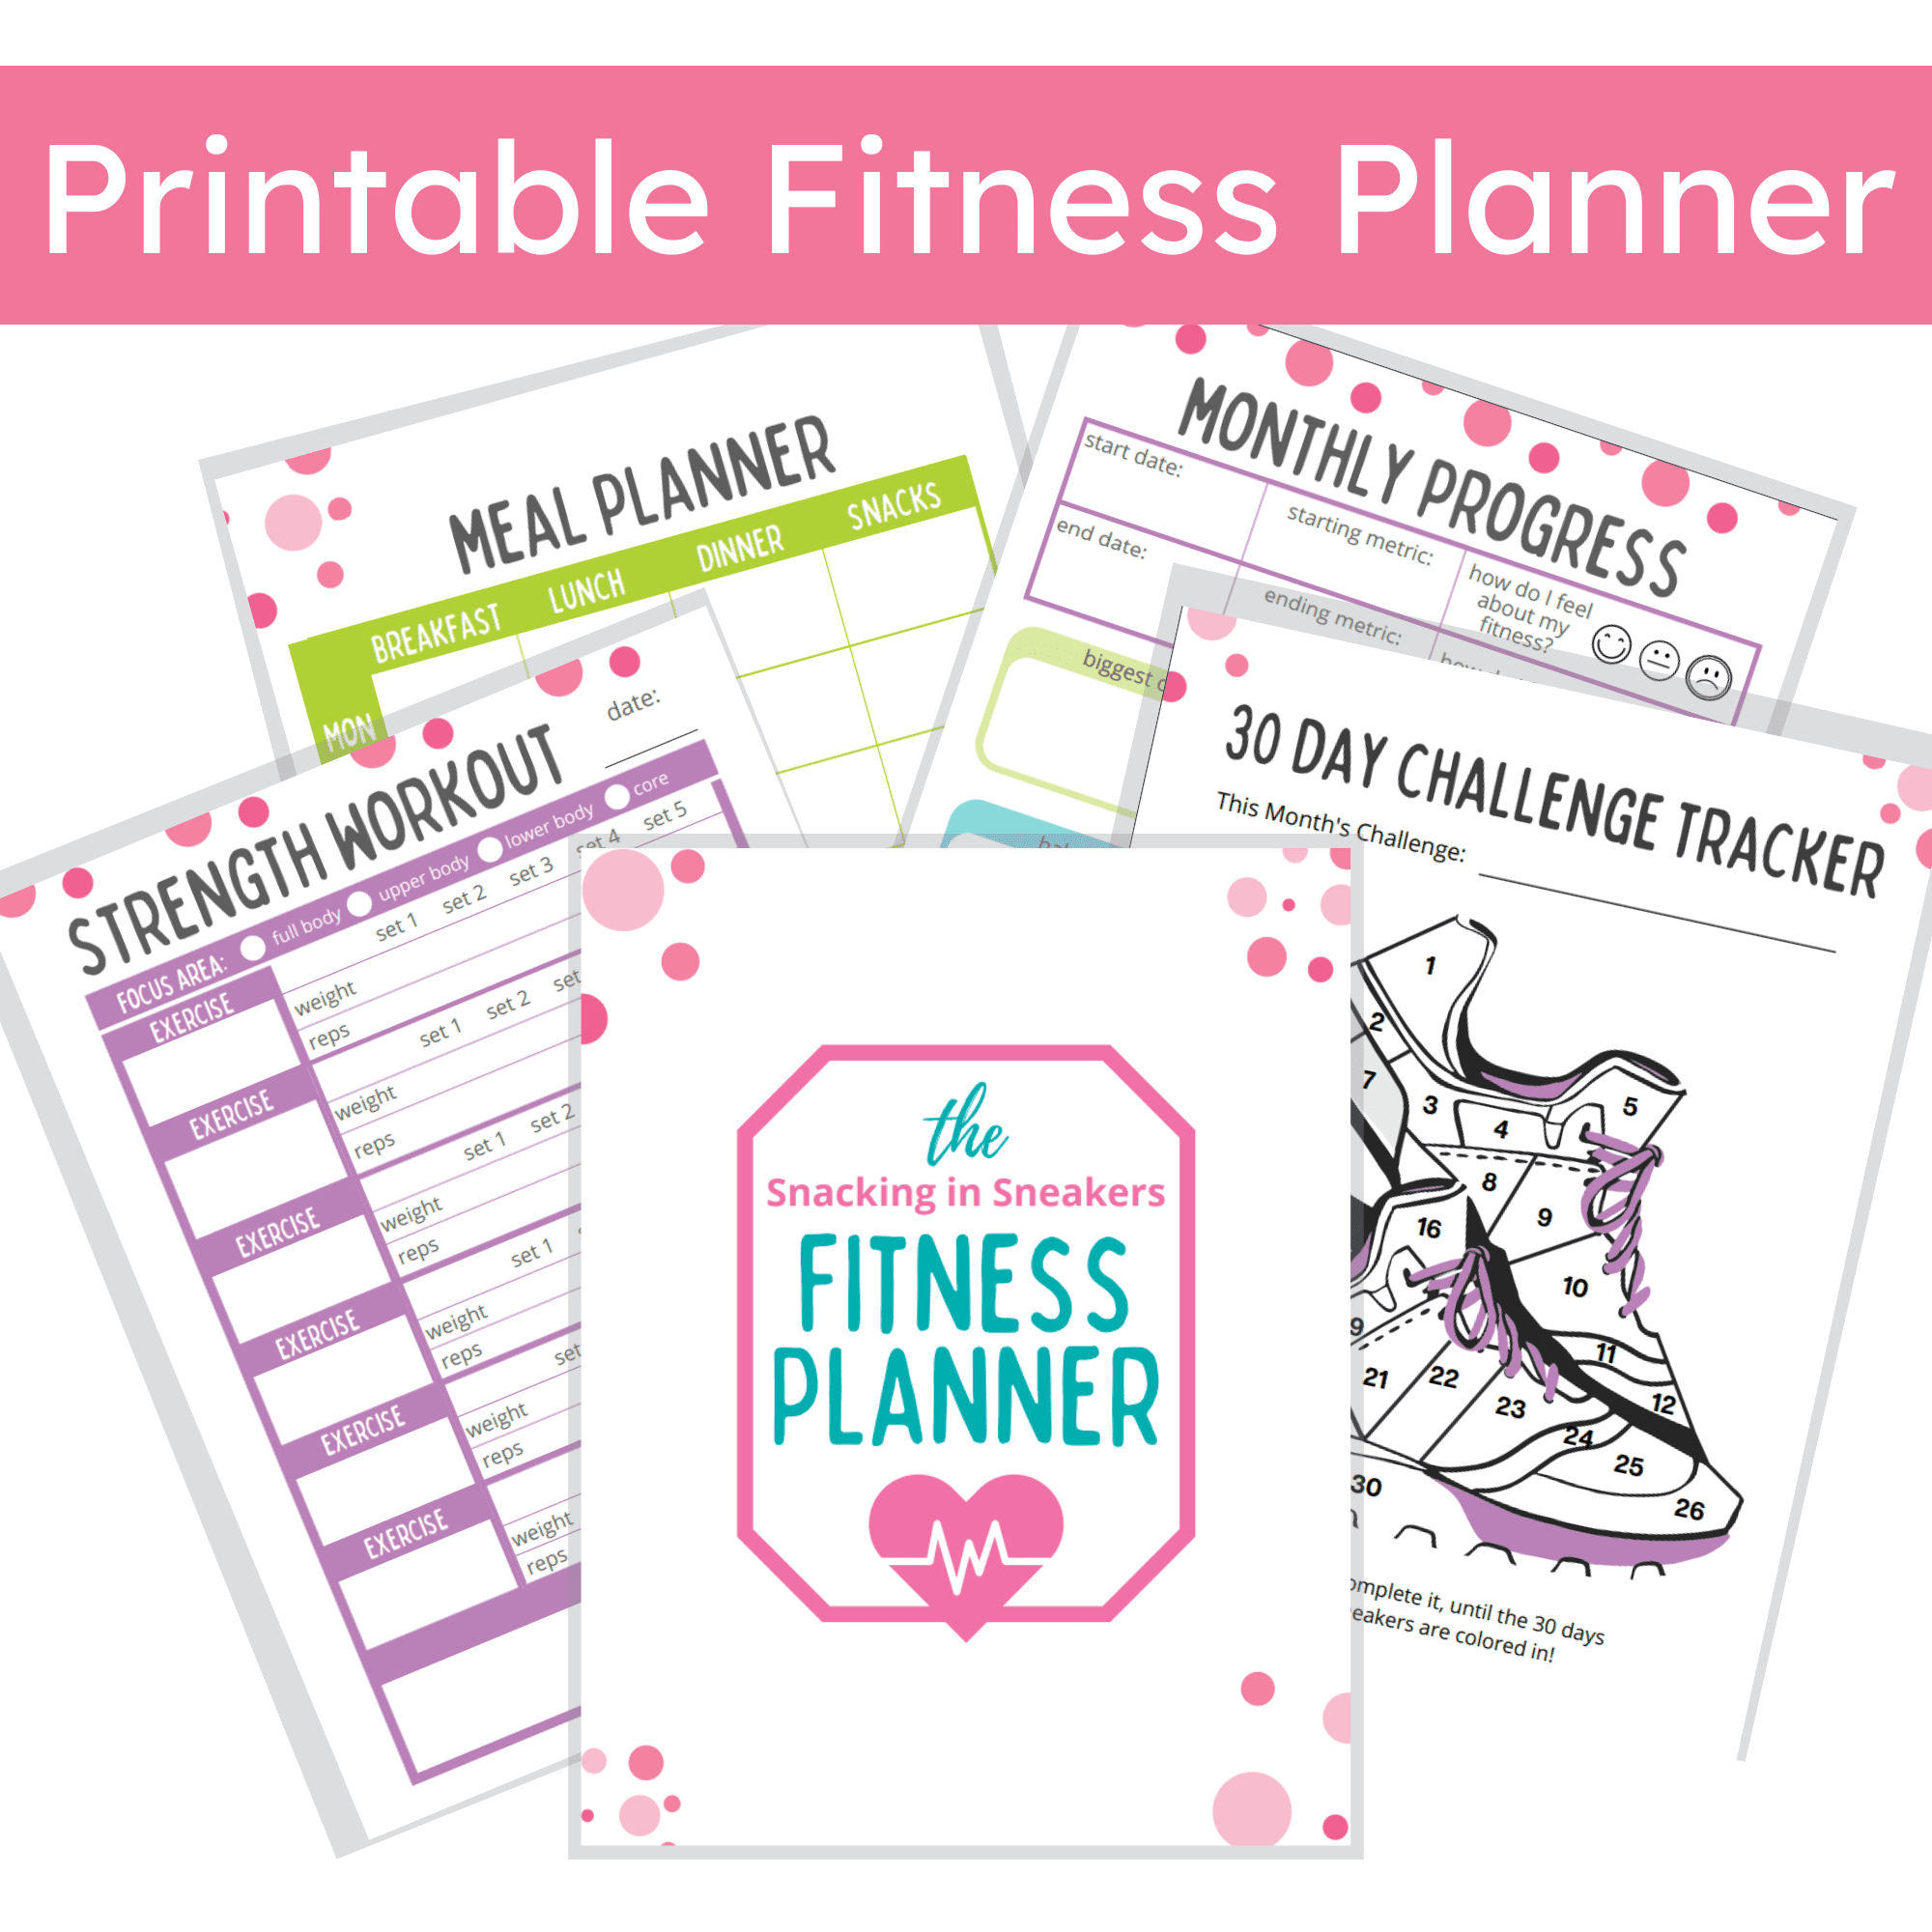 A mockup of several pages of a printable fitness planner and tracker.